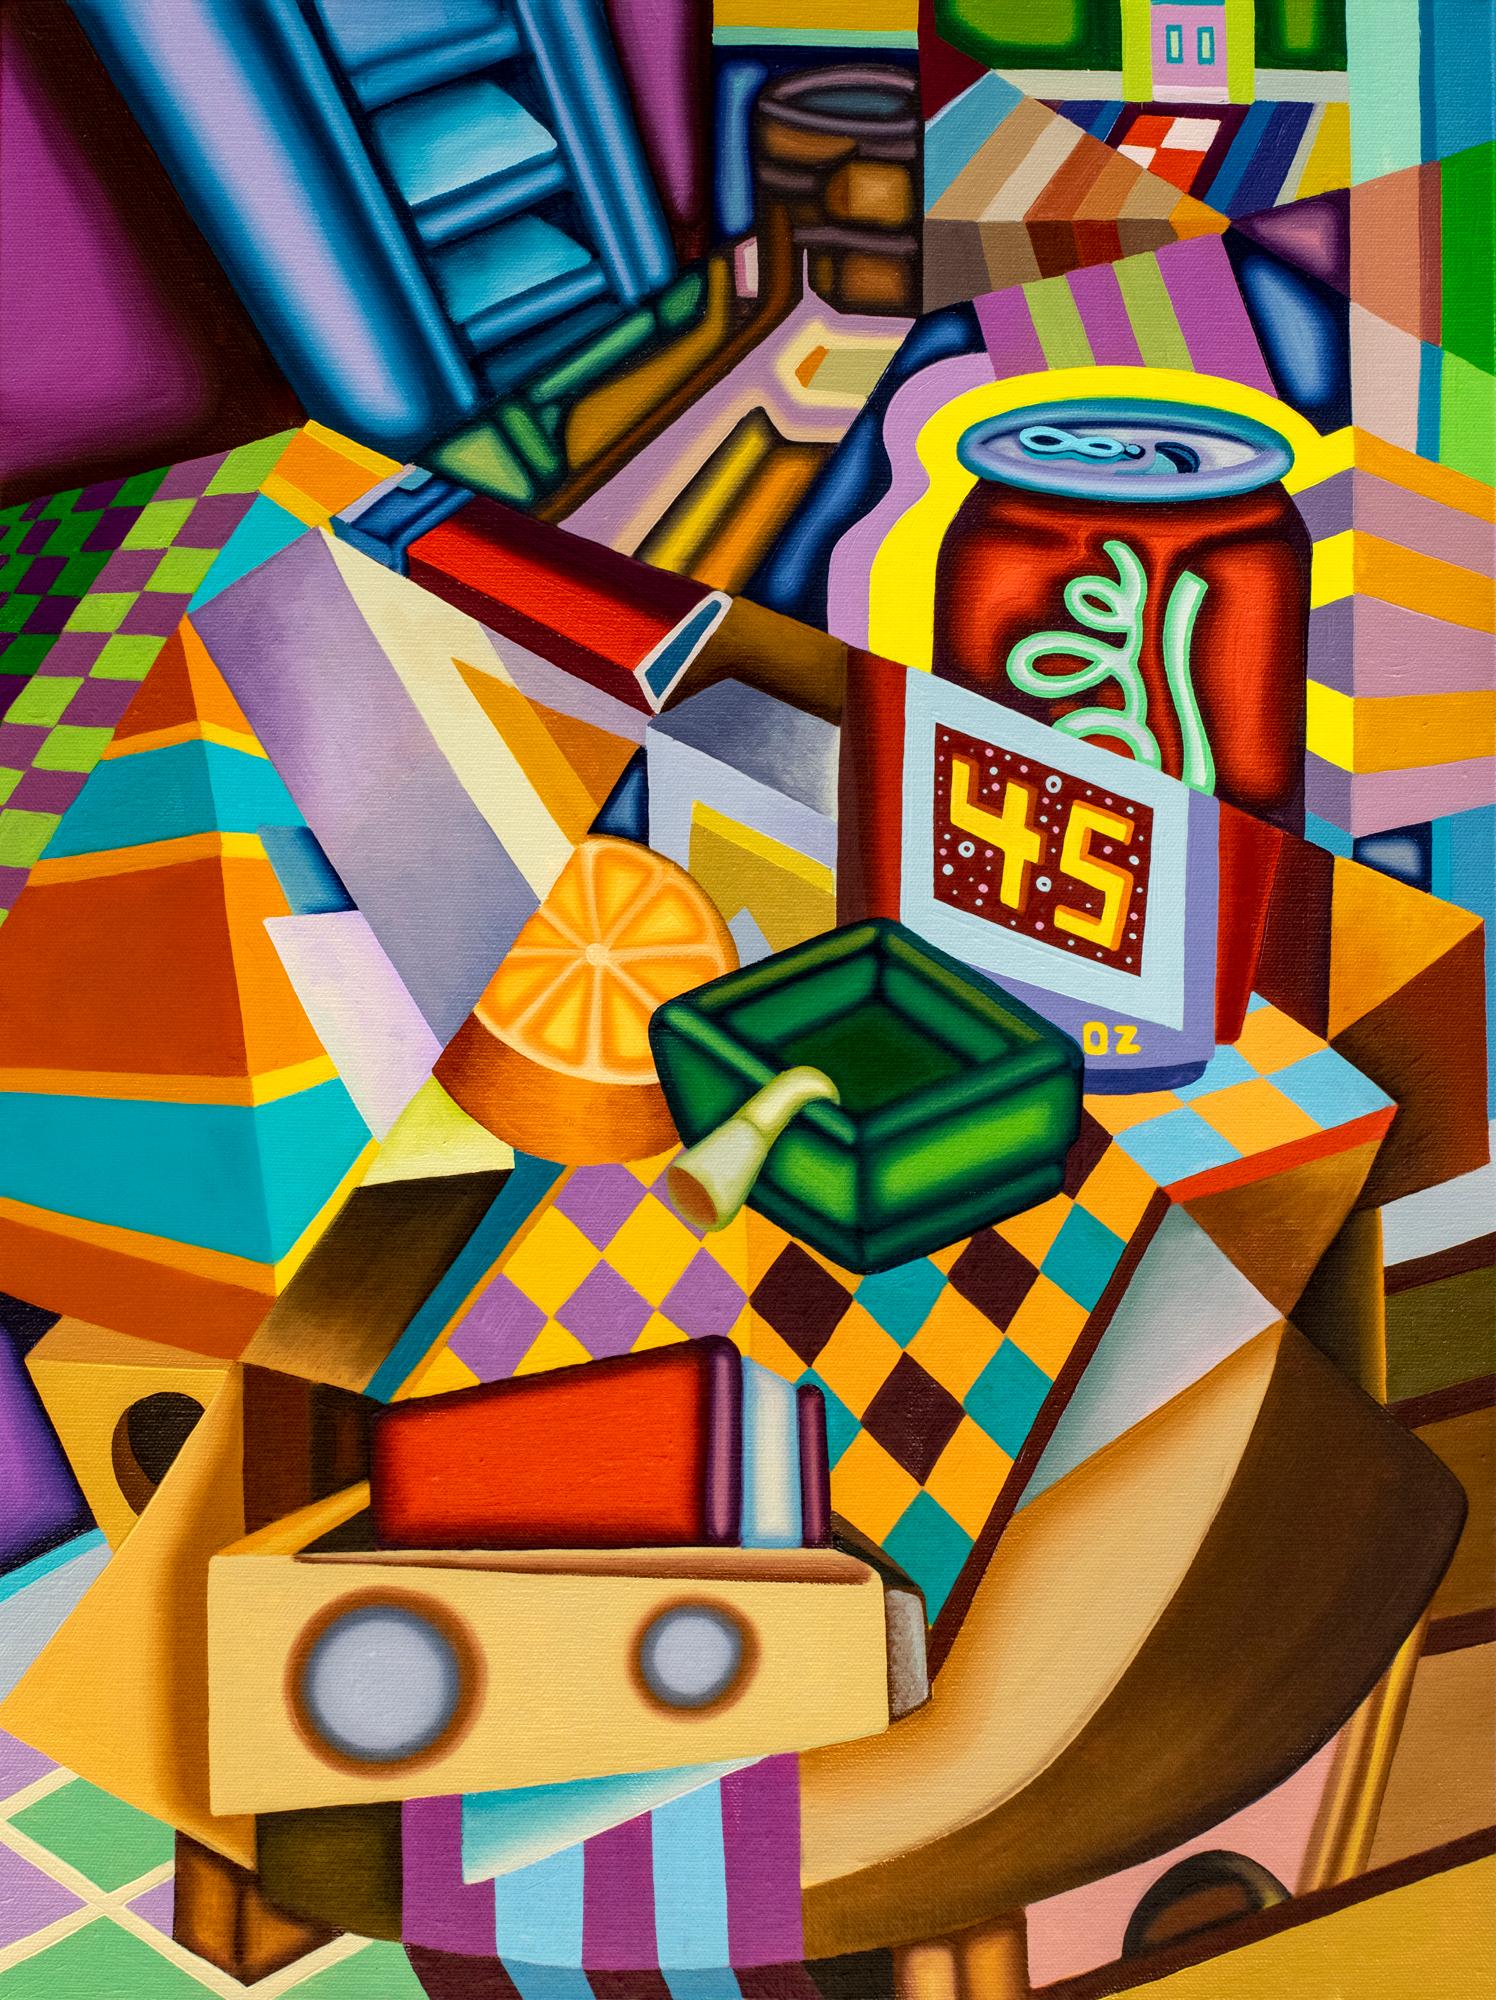 Jason Stout Interior Painting - 45 OLé COLLAPSE- Cubist, Surreal Still Life with Bold Colors, Beer Can, Orange